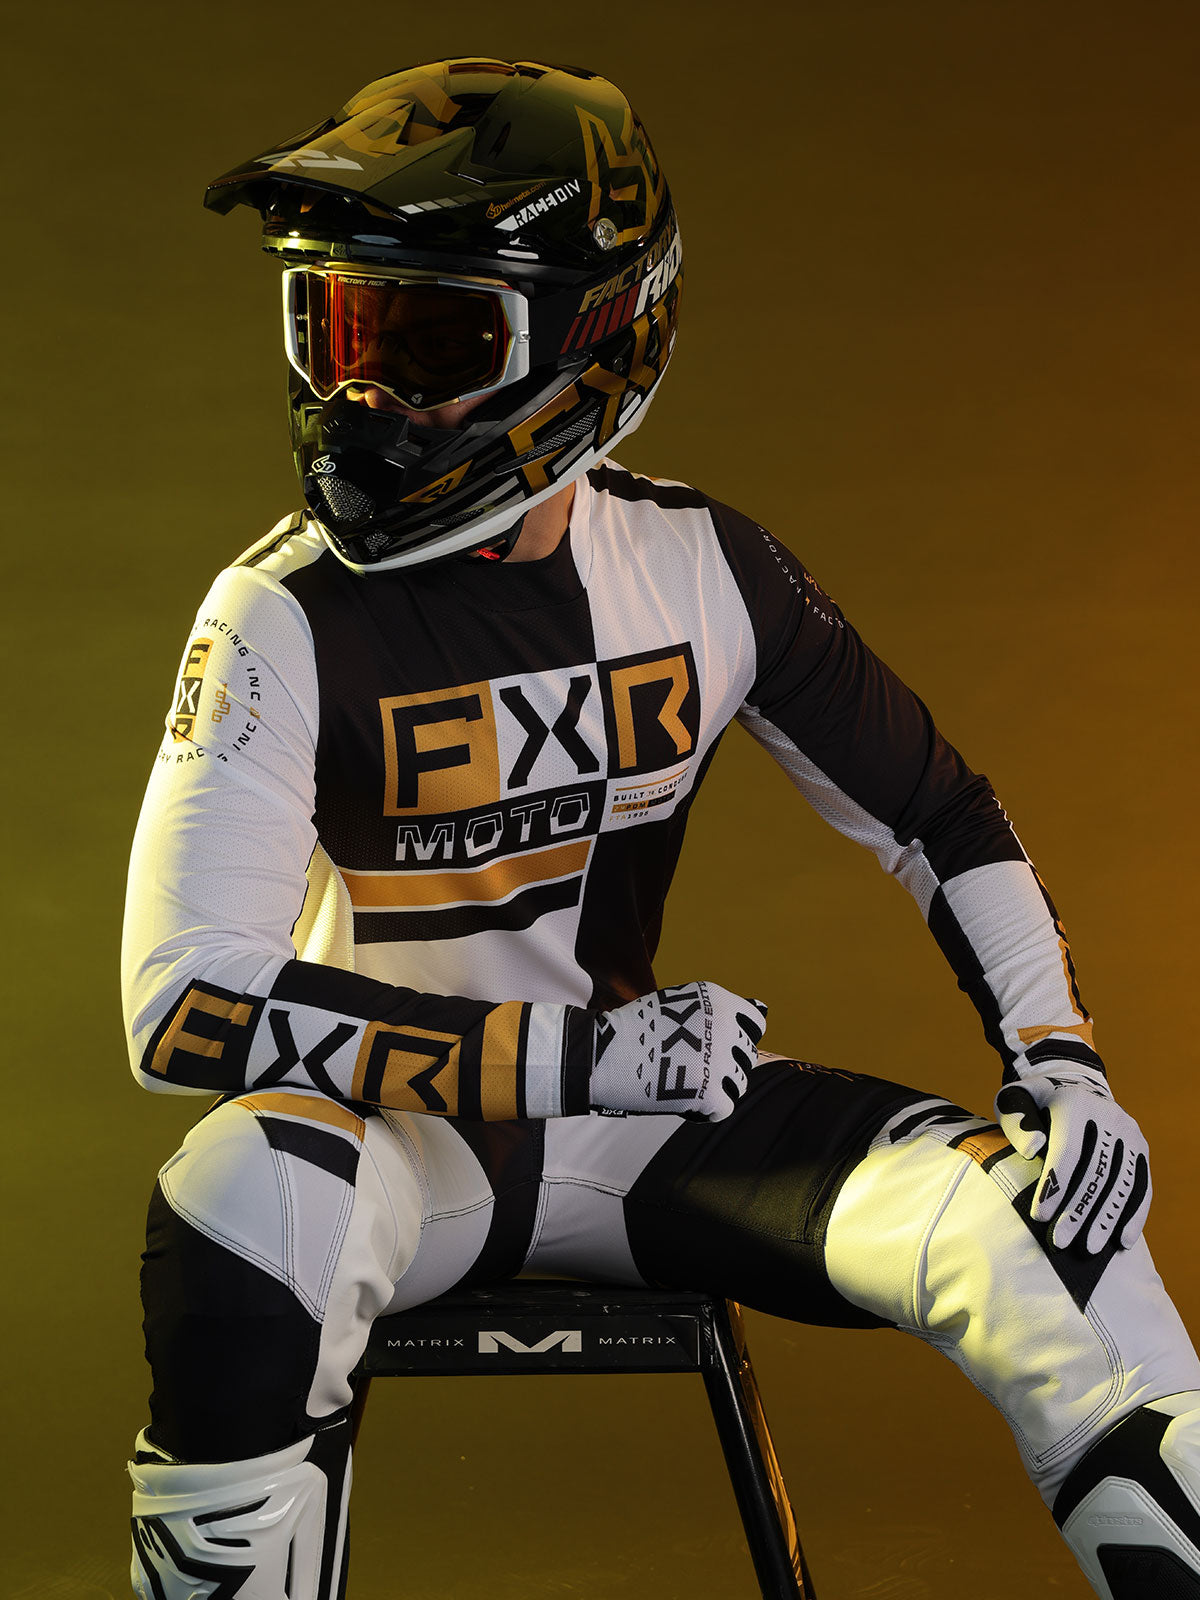 Creative studio shot of a guy in FXR's Battalion jersey and pant in black/white colorway